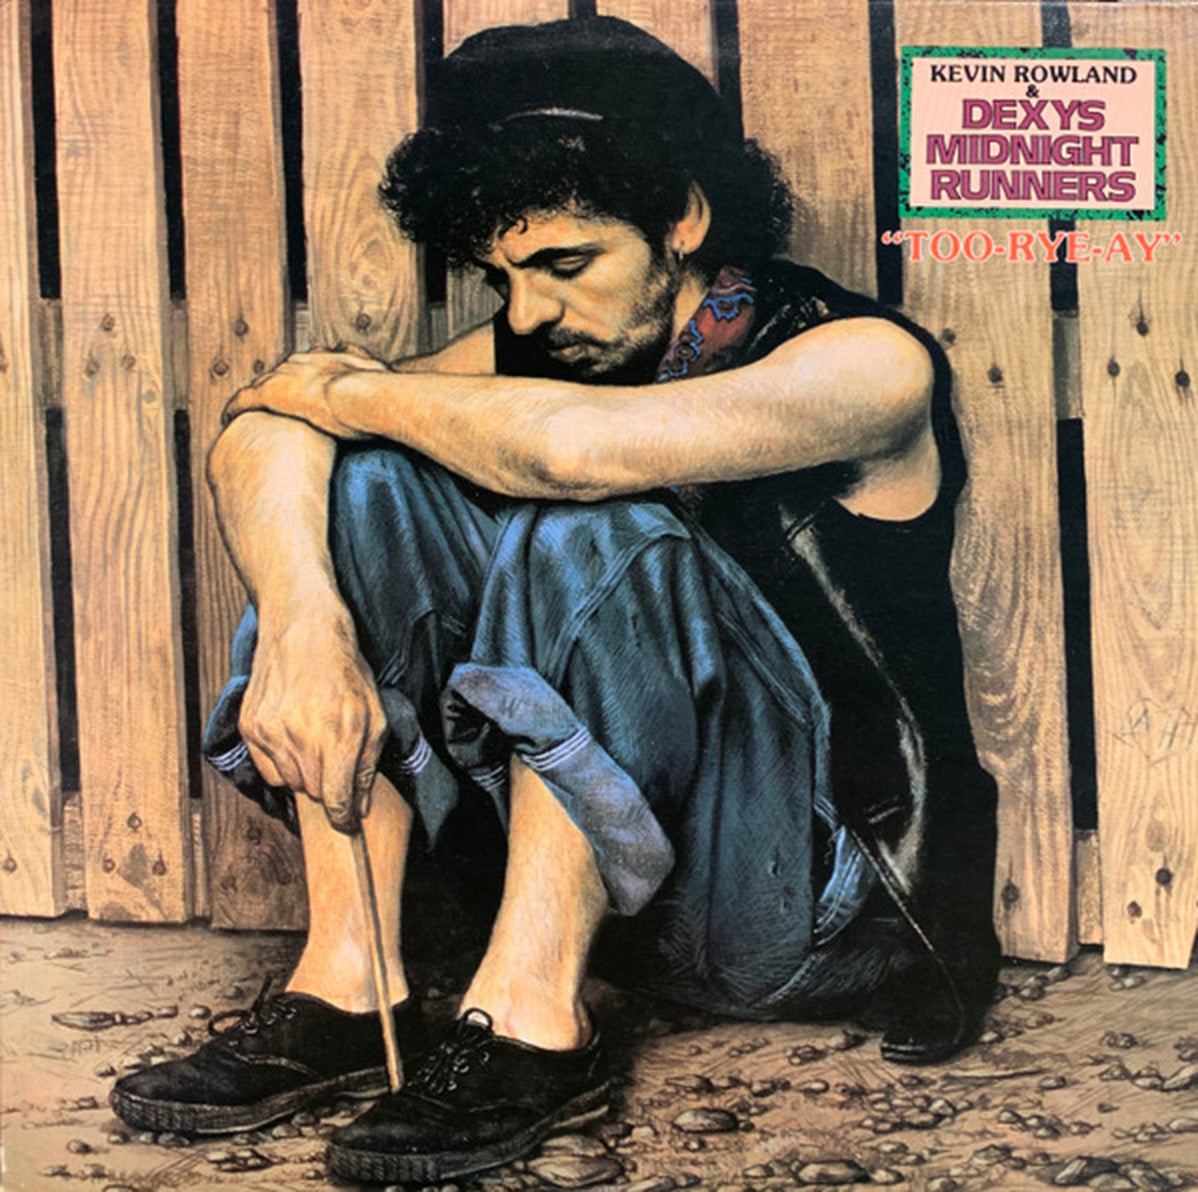 Dexys Midnight Runners & Kevin Rowland – Too-Rye-Ay - 1982